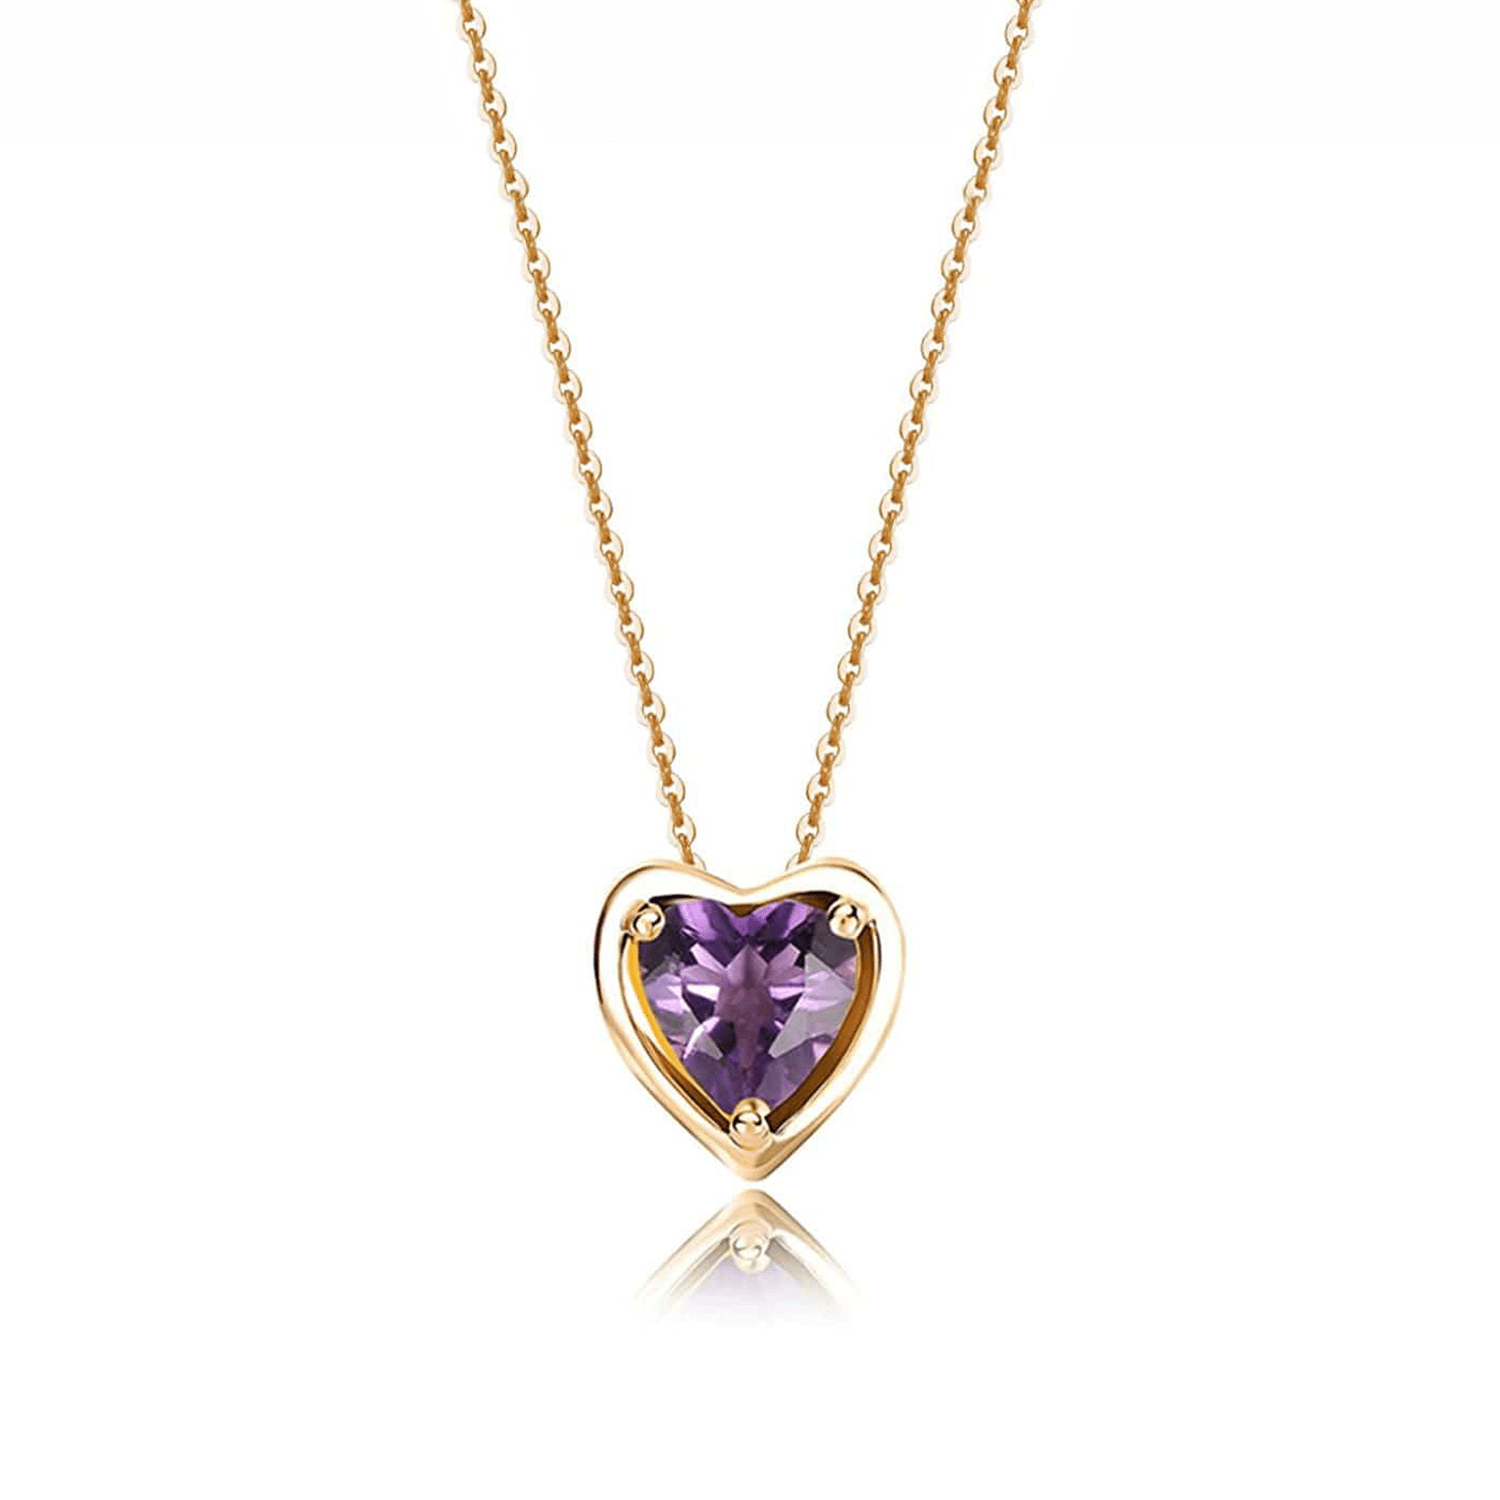 FANCIME Delicate Amethyst Heart February Birthstone 14K Gold Necklace Main